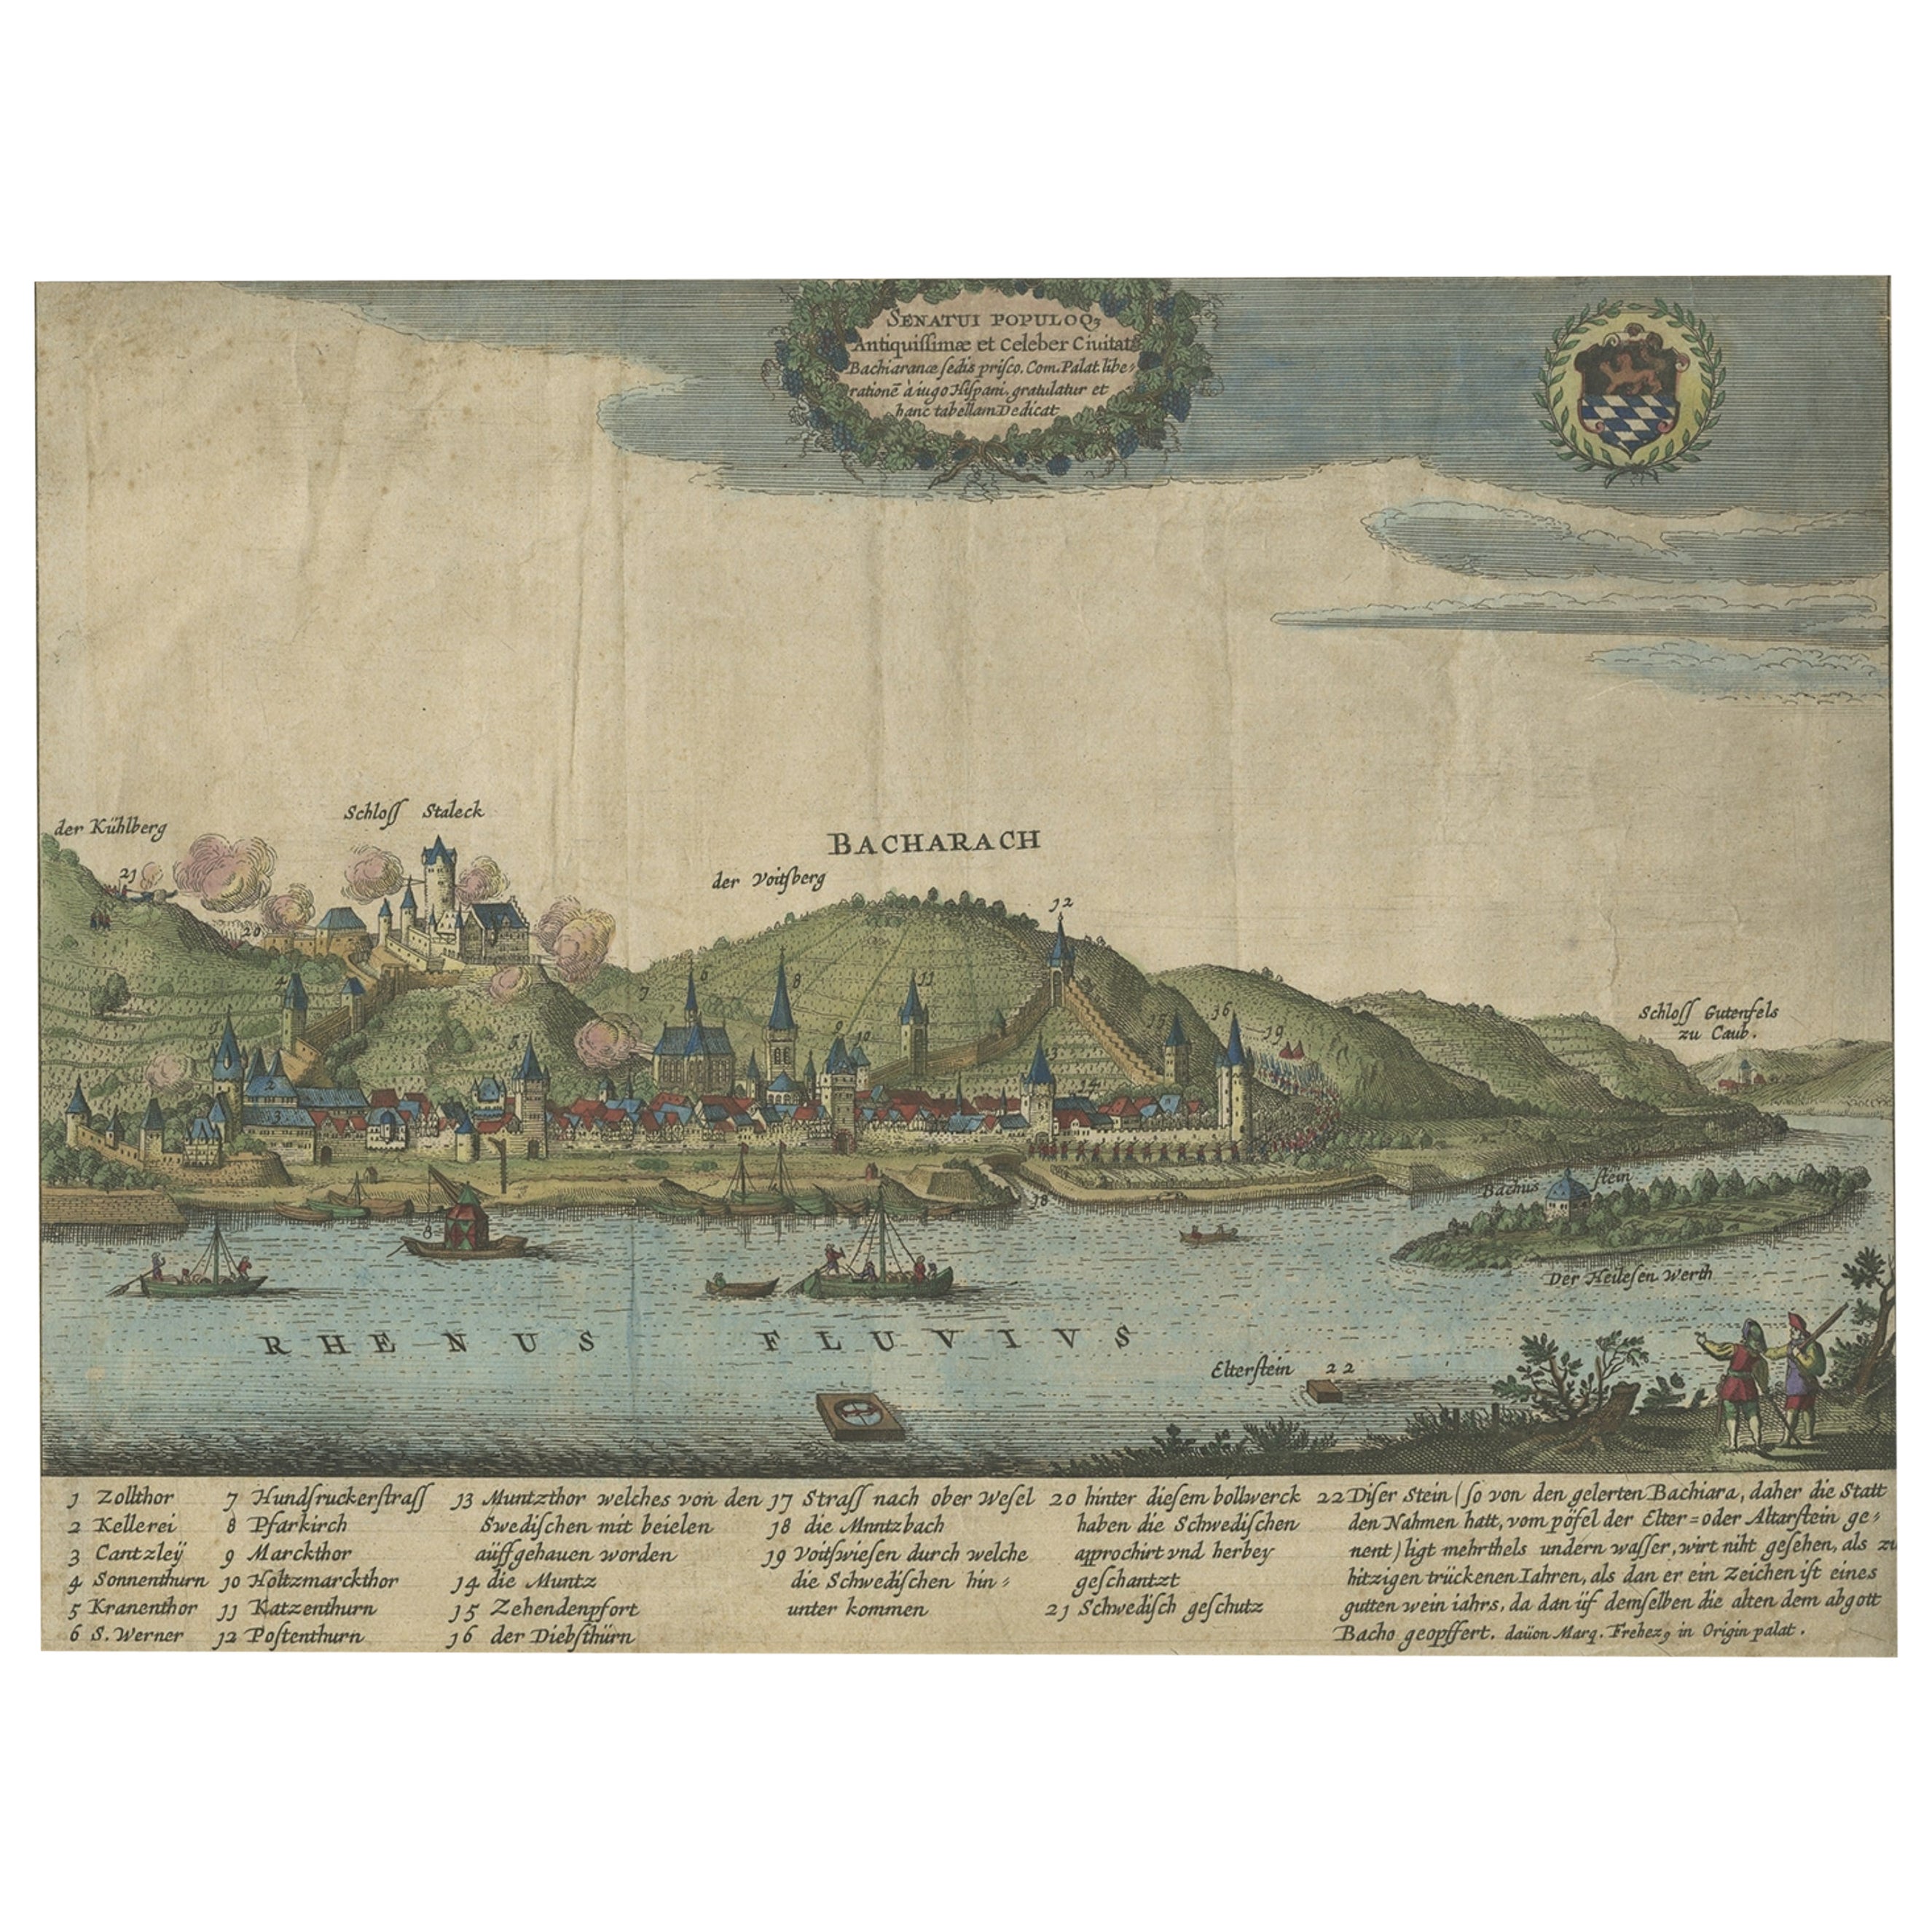 View of Bacharach, Mainz-Bingen District in Rhineland-Palatinate, Germany, 1650 For Sale